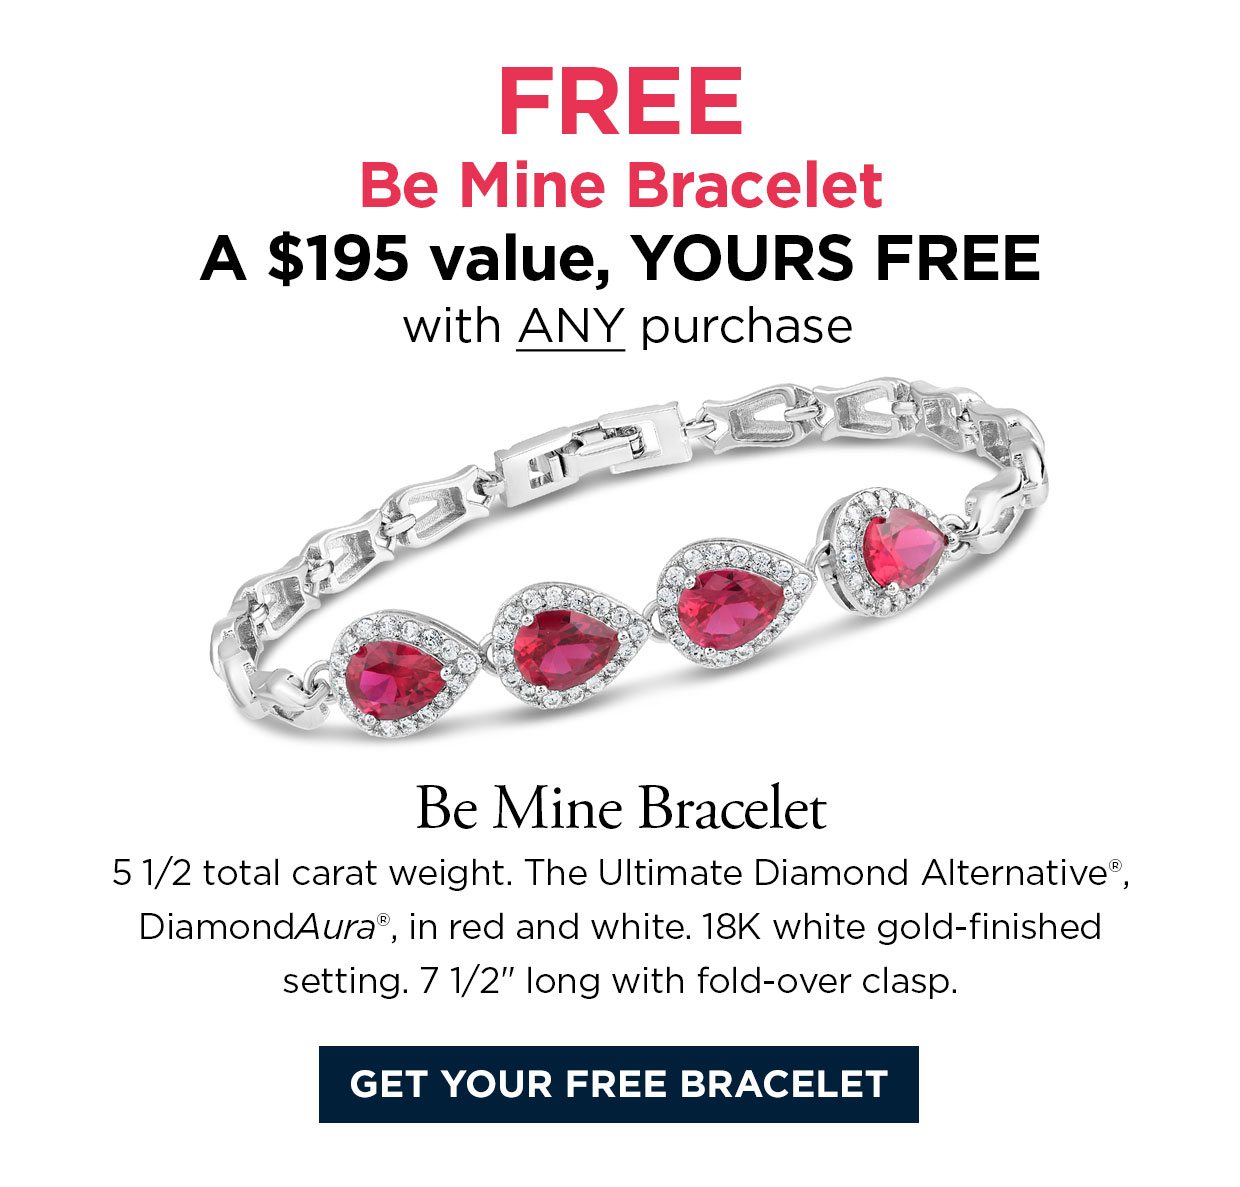 FREE Be Mine Bracelet. A $195 value, YOURS FREE with ANY purchase. Be Mine Bracelet 5 1/2 total carat weight. The Ultimate Diamond Alternative®, DiamondAura®, in red and white. 18K white gold-finished setting. 7 1/2 inches long with fold-over clasp. Get your free bracelet link.